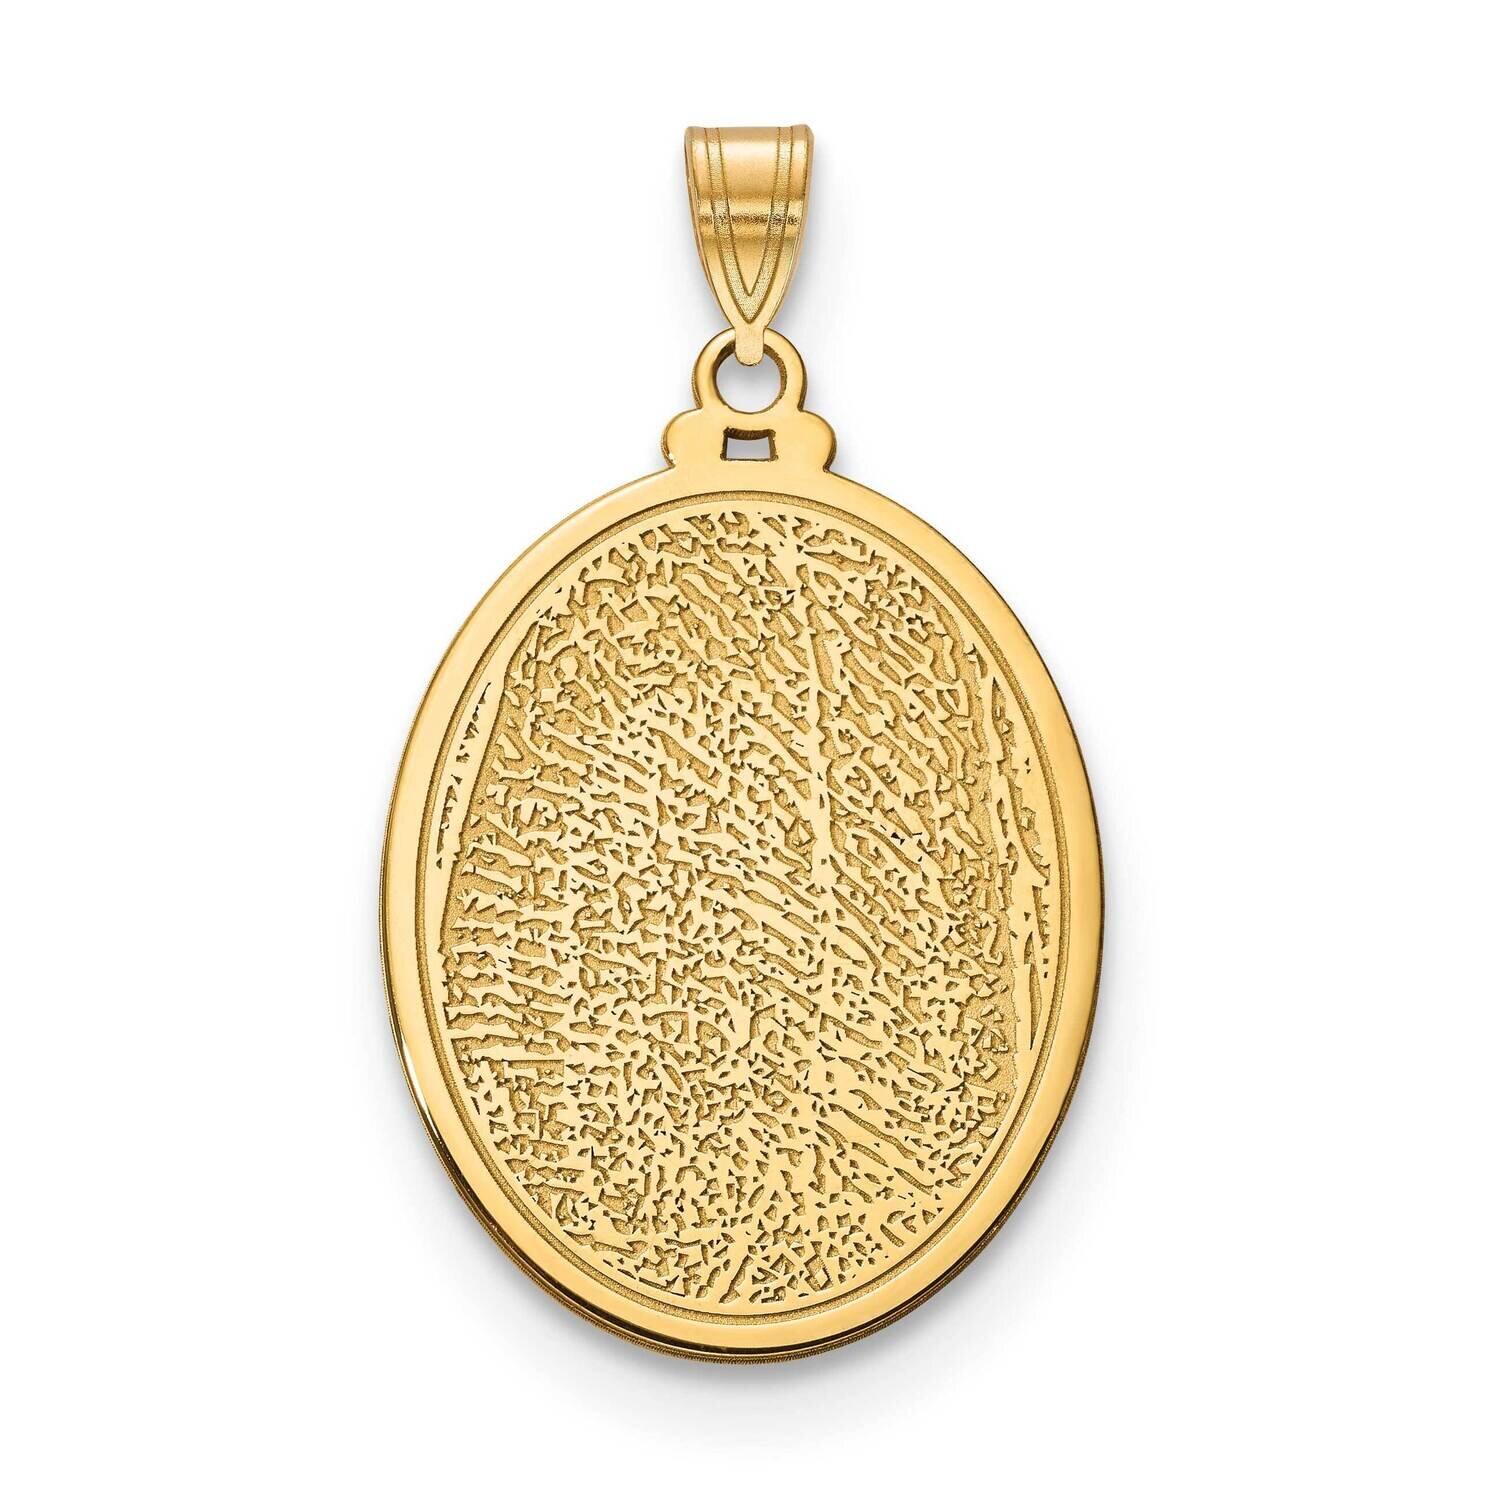 .027 Thickness Personalized Fingerprint Pendant Gold Plated Sterling Silver XNA909GP